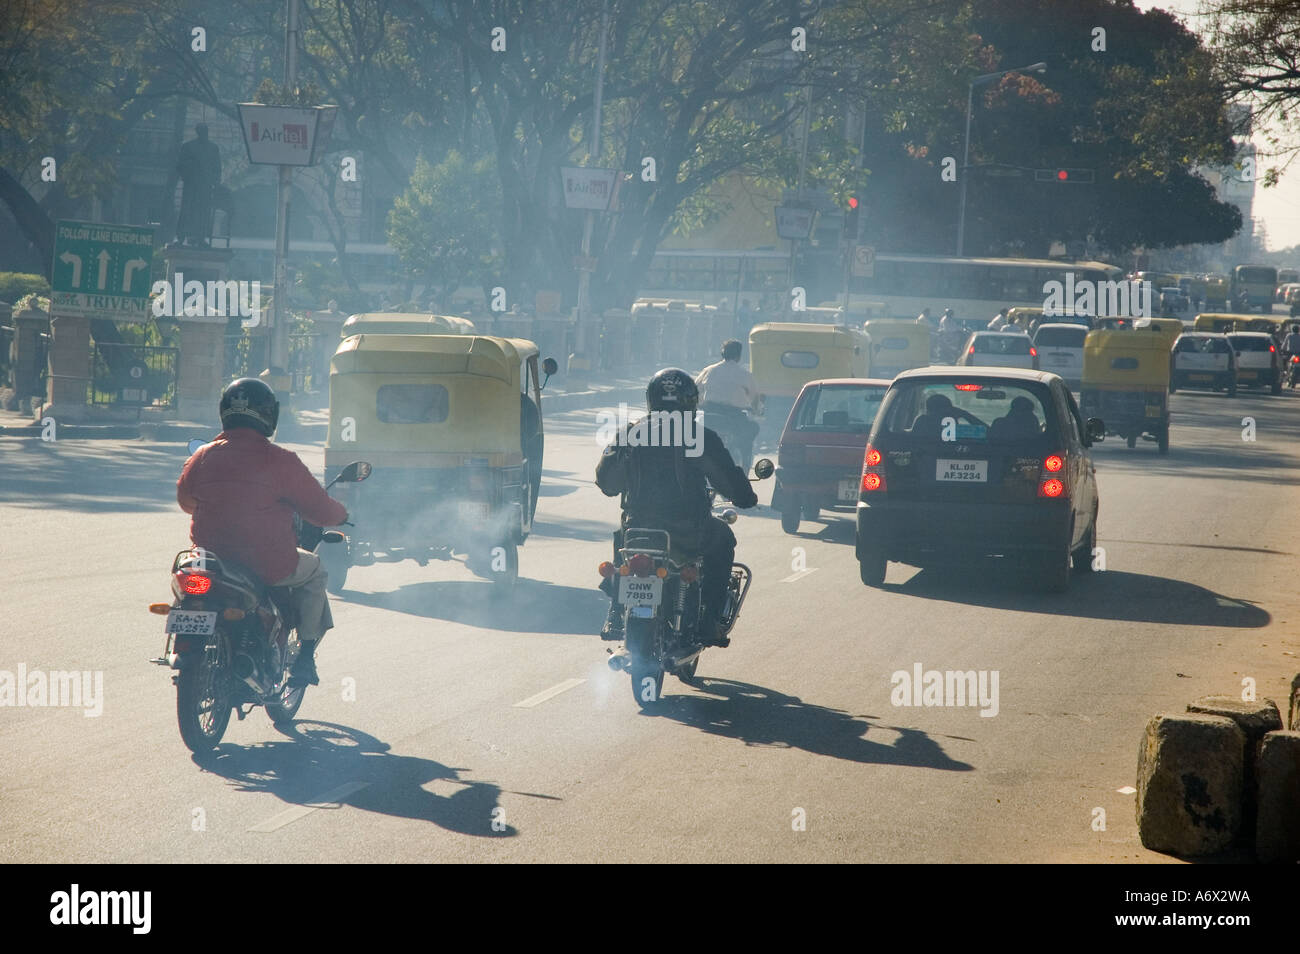 Air pollution in Bangalore India from vehicle exhaust fumes Stock Photo